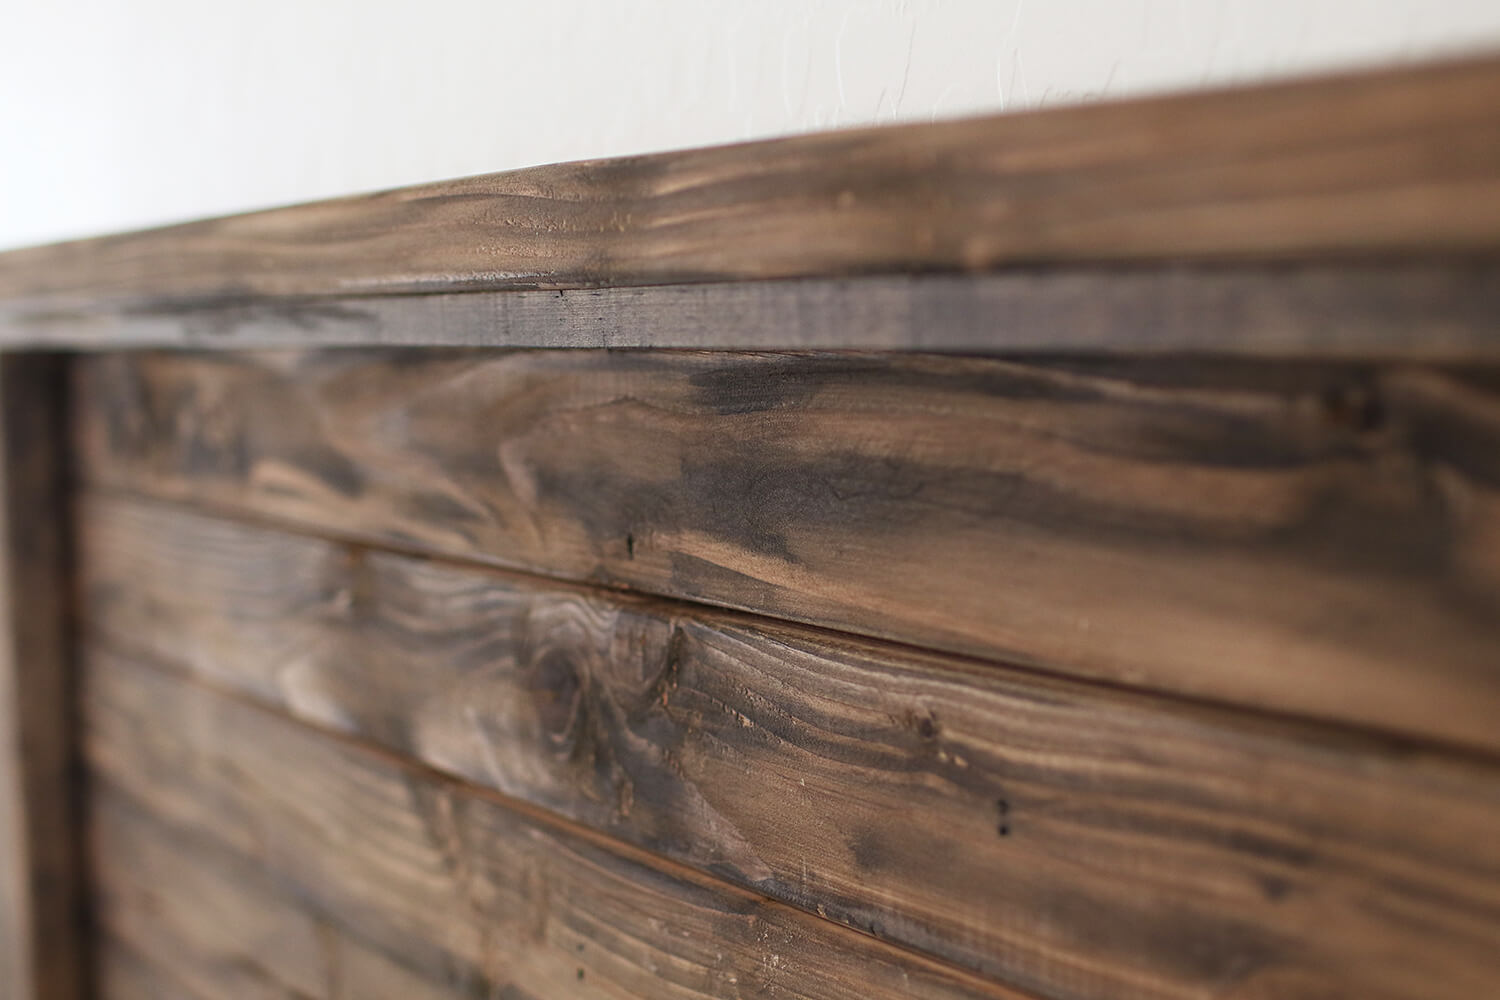 Sharing a DIY farmhouse headboard project including plans and supply list for you! We built this for a California King size bed, but you could easily customize the measurements for your own DIY headboard. Catch it now over on KaraLayne.com!